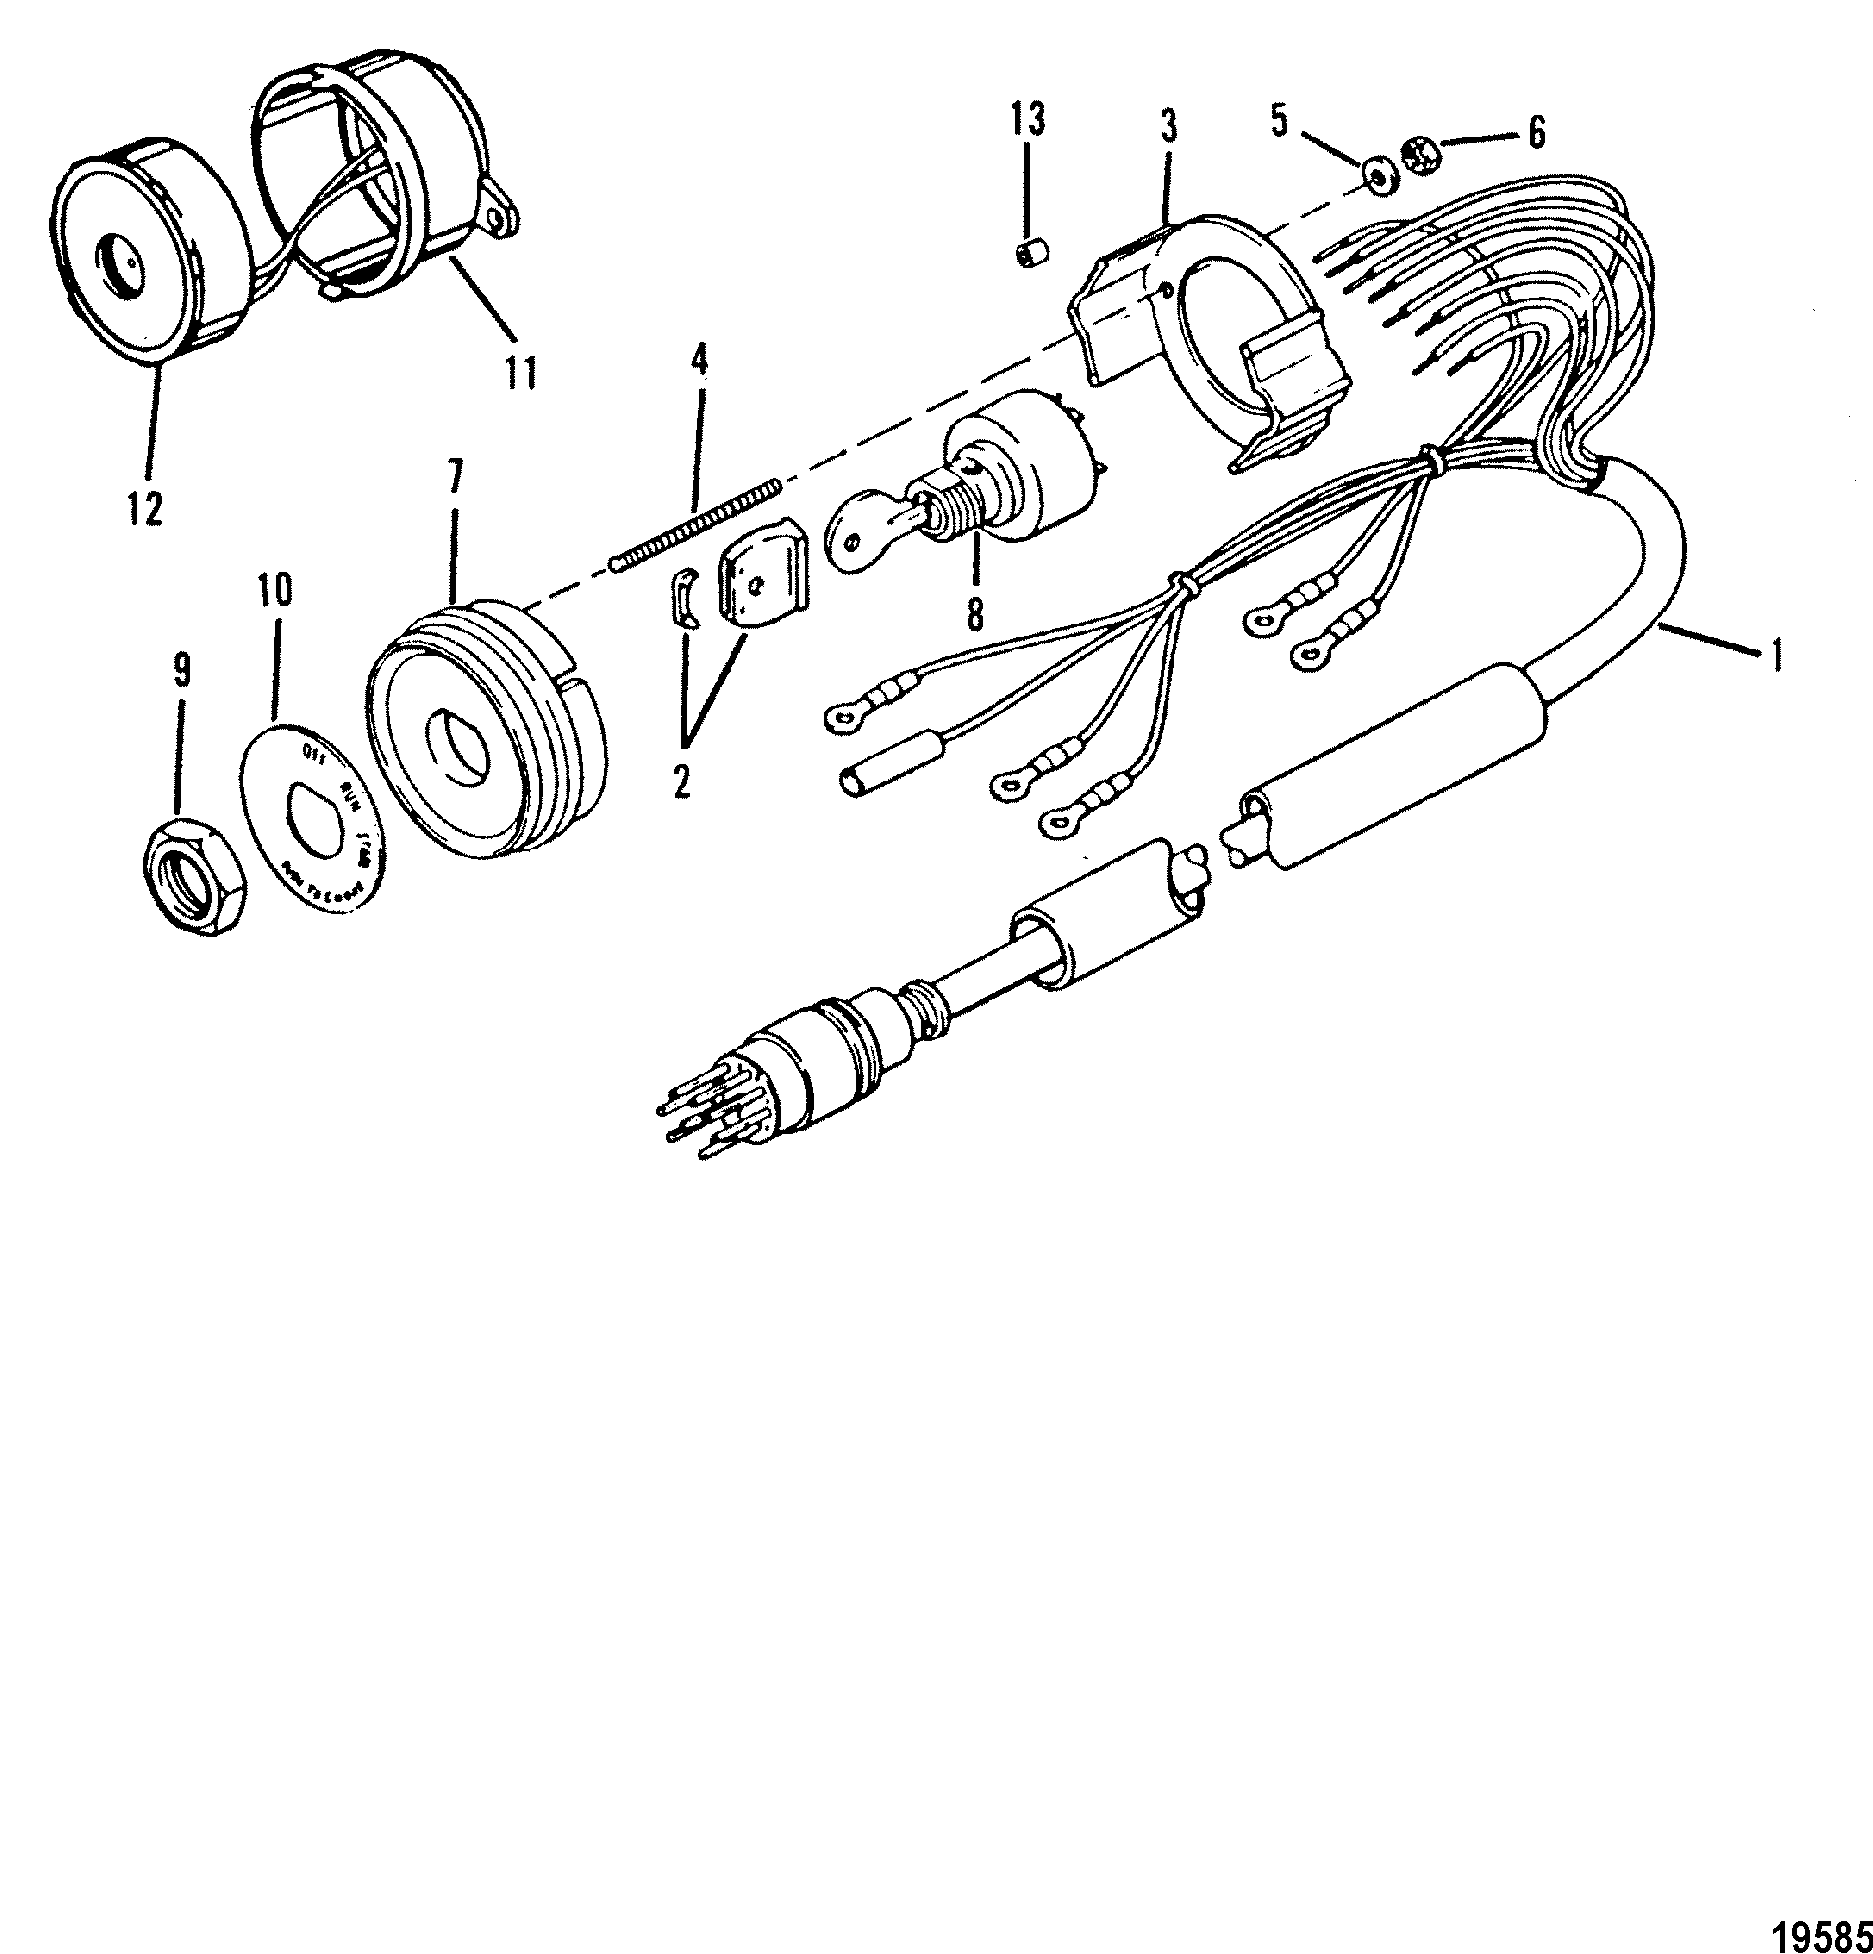 Key Switch(Counter Rotation Engines)